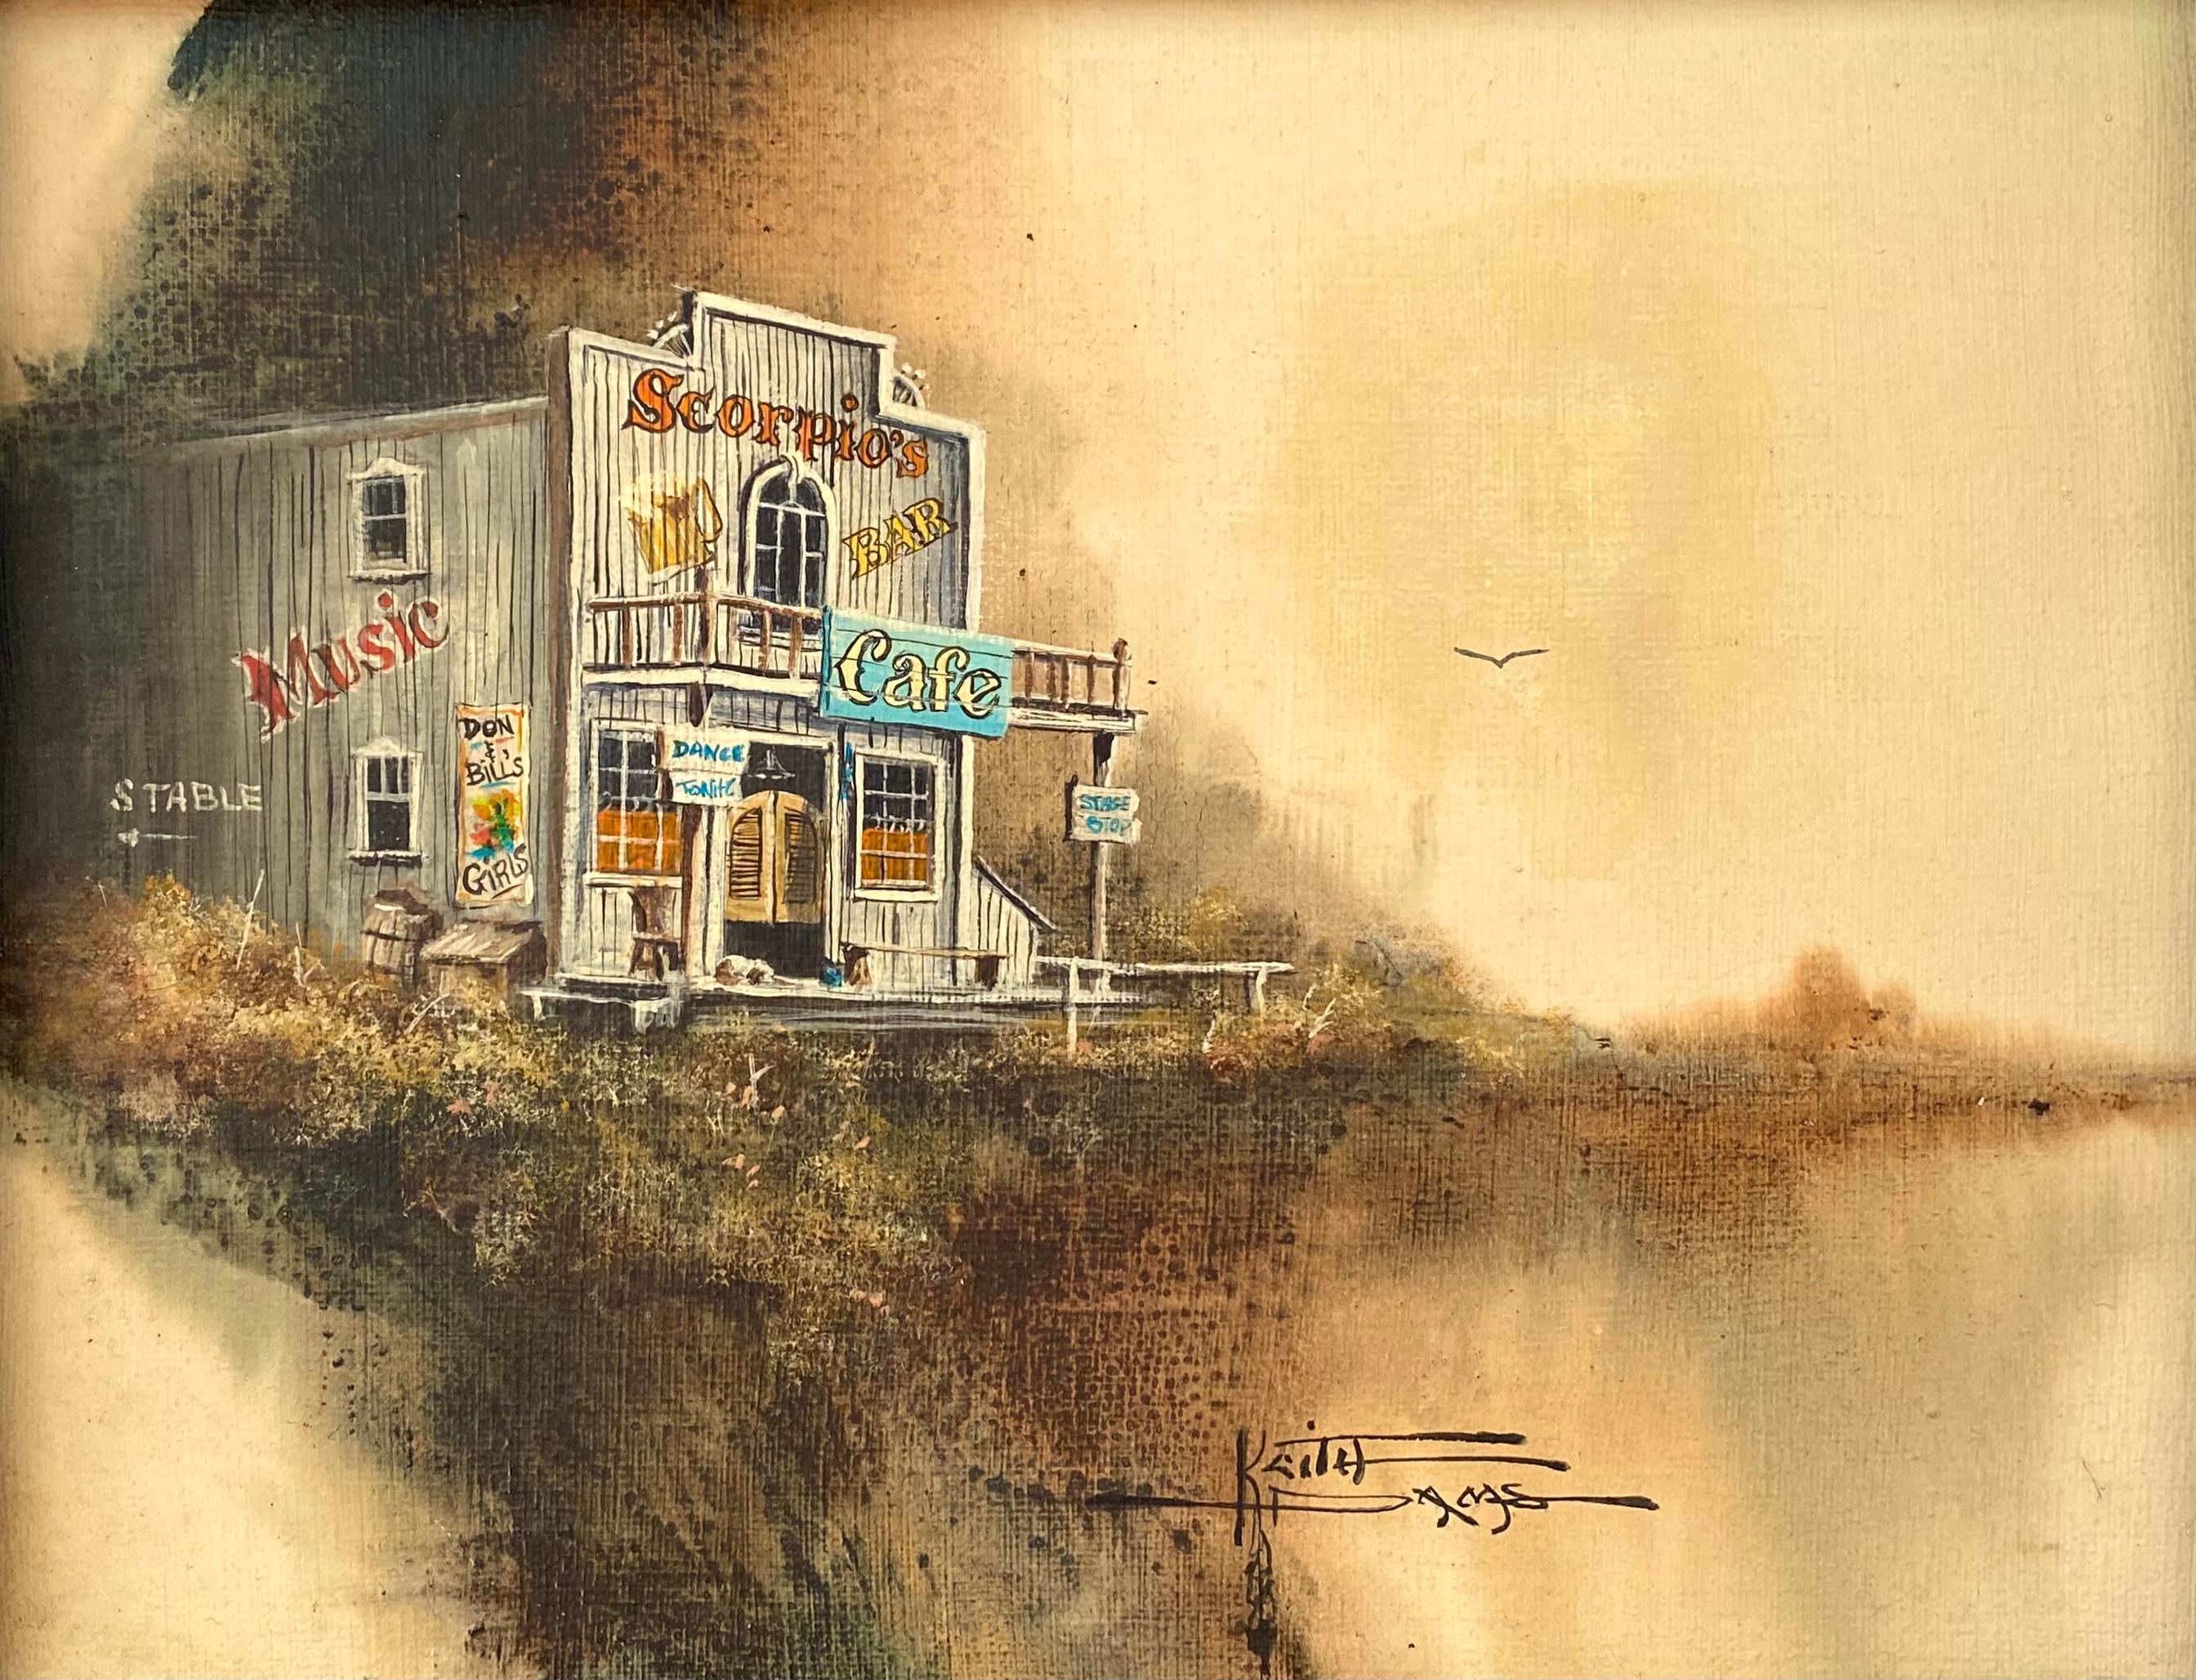 Keith Holmes Landscape Painting - “Scorpio’s Bar and Cafe”